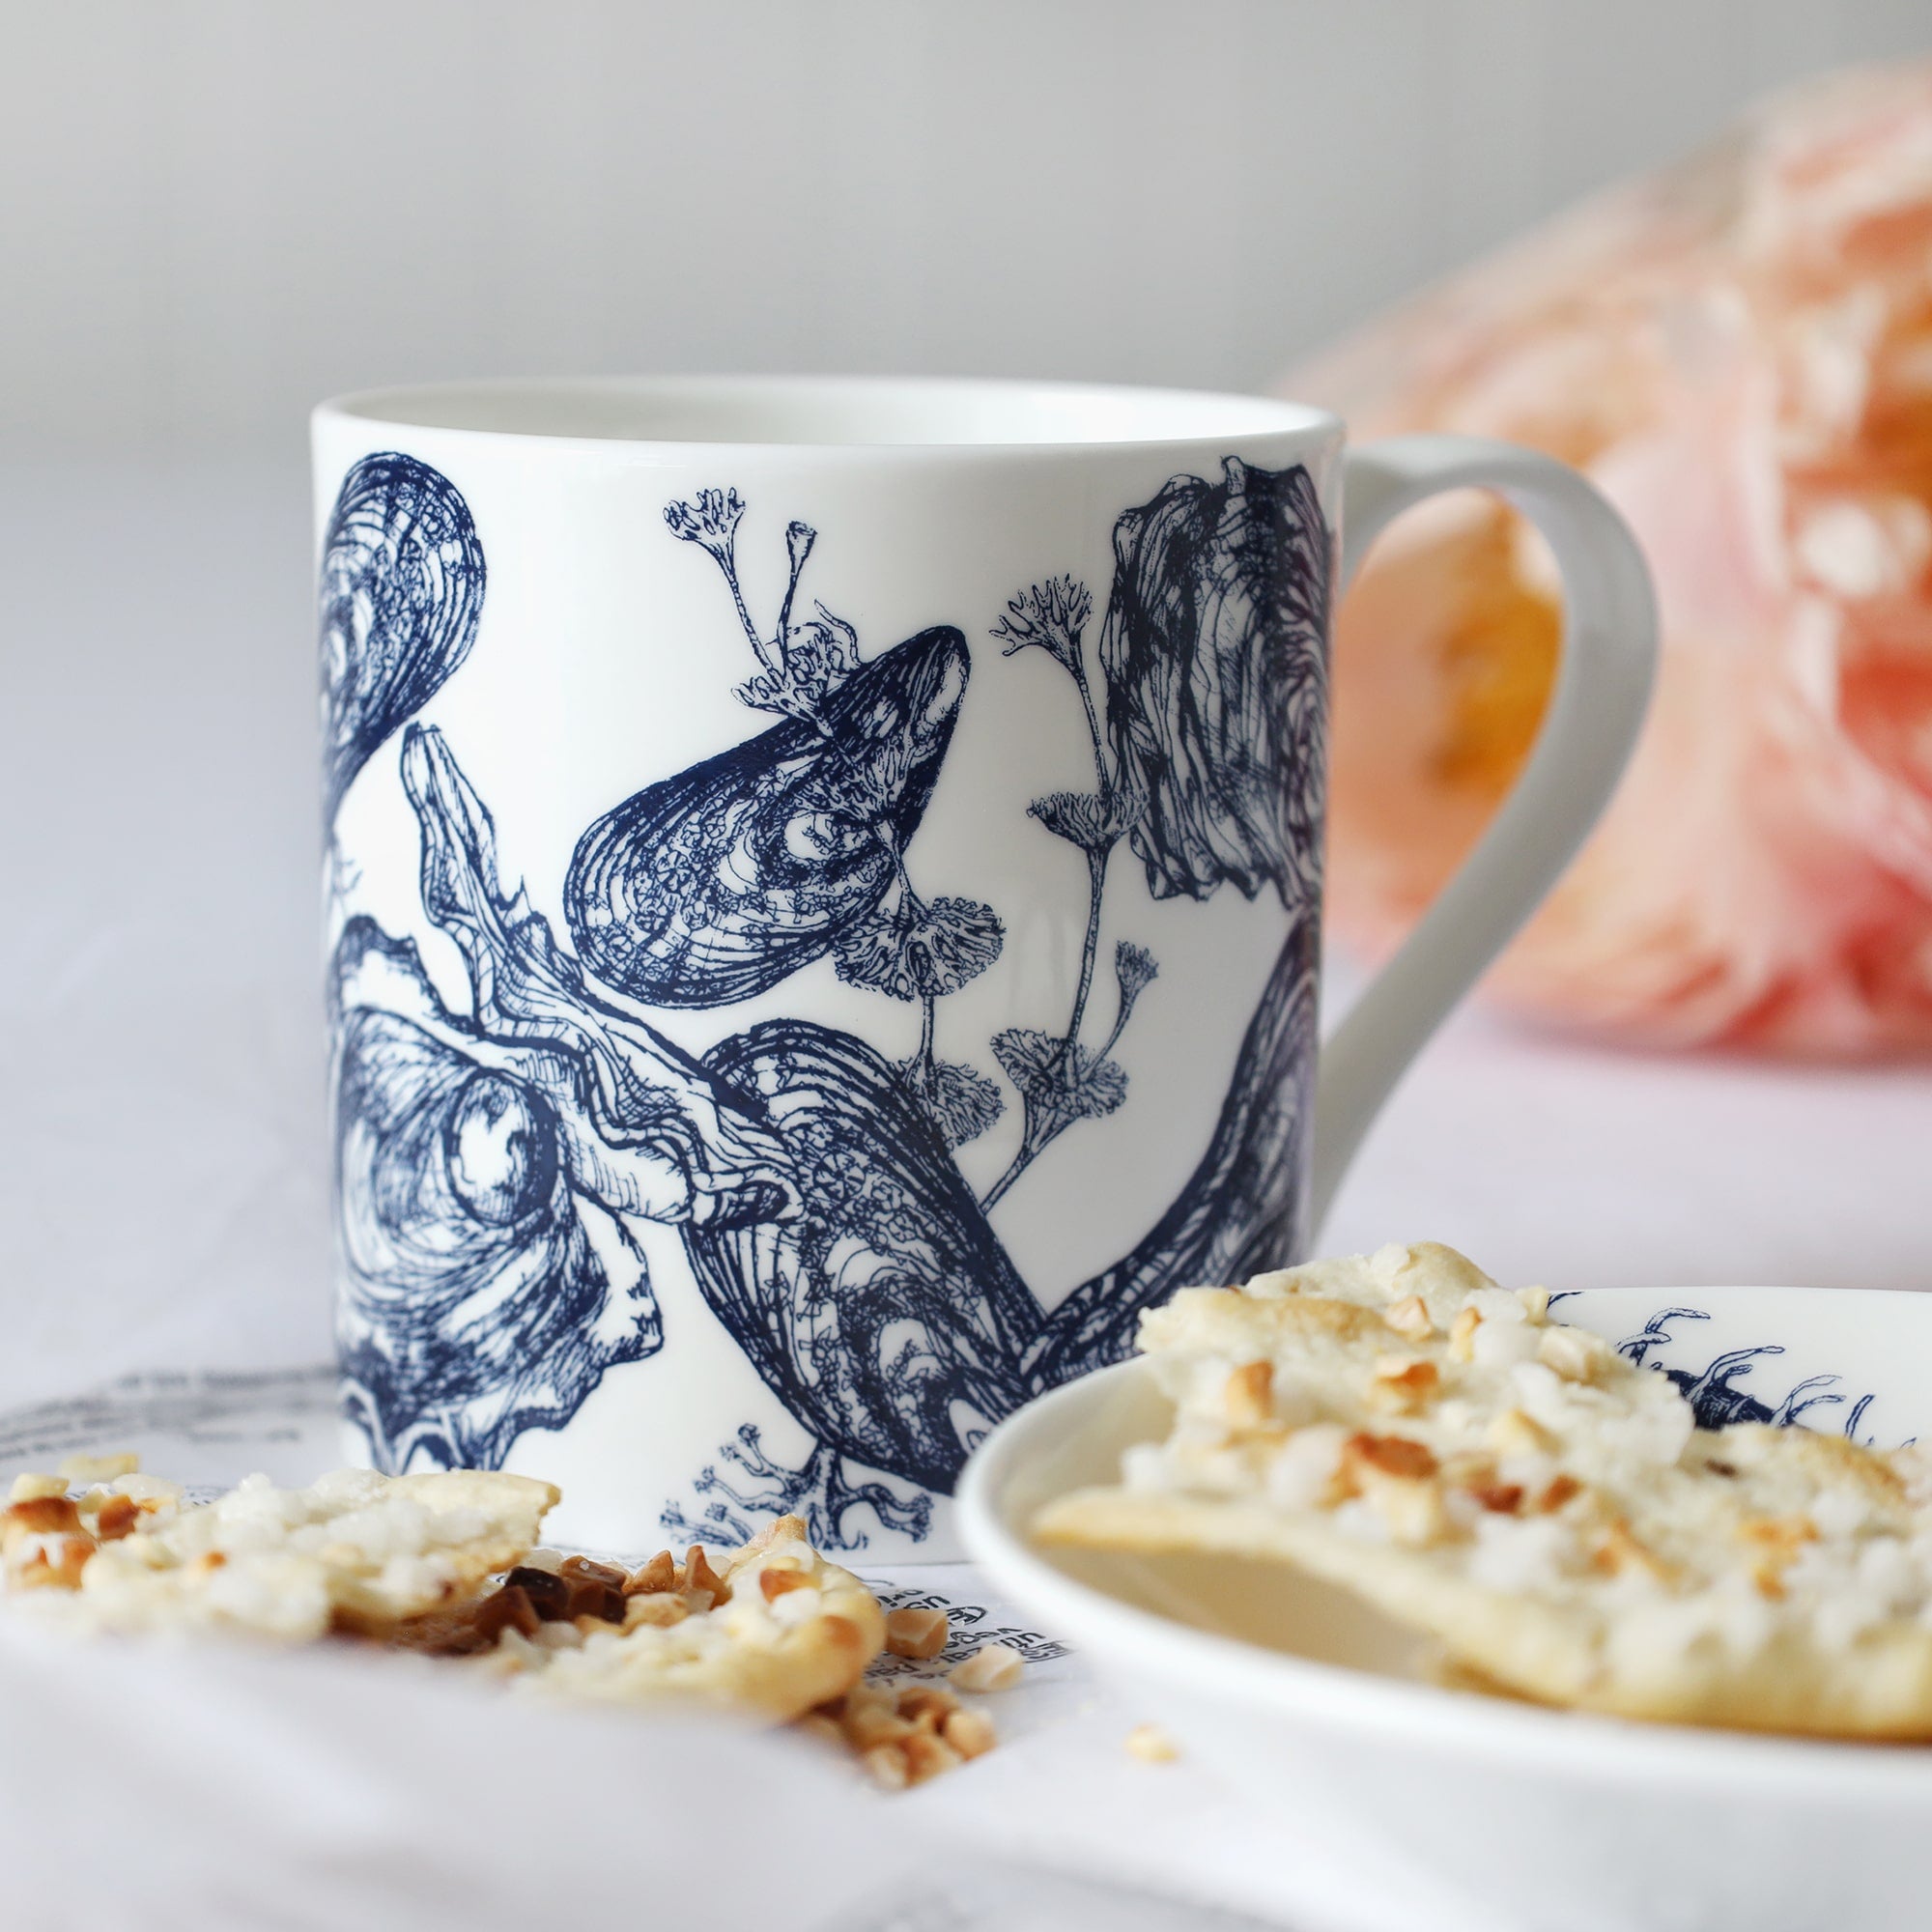 White mug with dark blue mussel & oyster shells illustration sitting on a table with a plate & biscuits and flowers in the background.